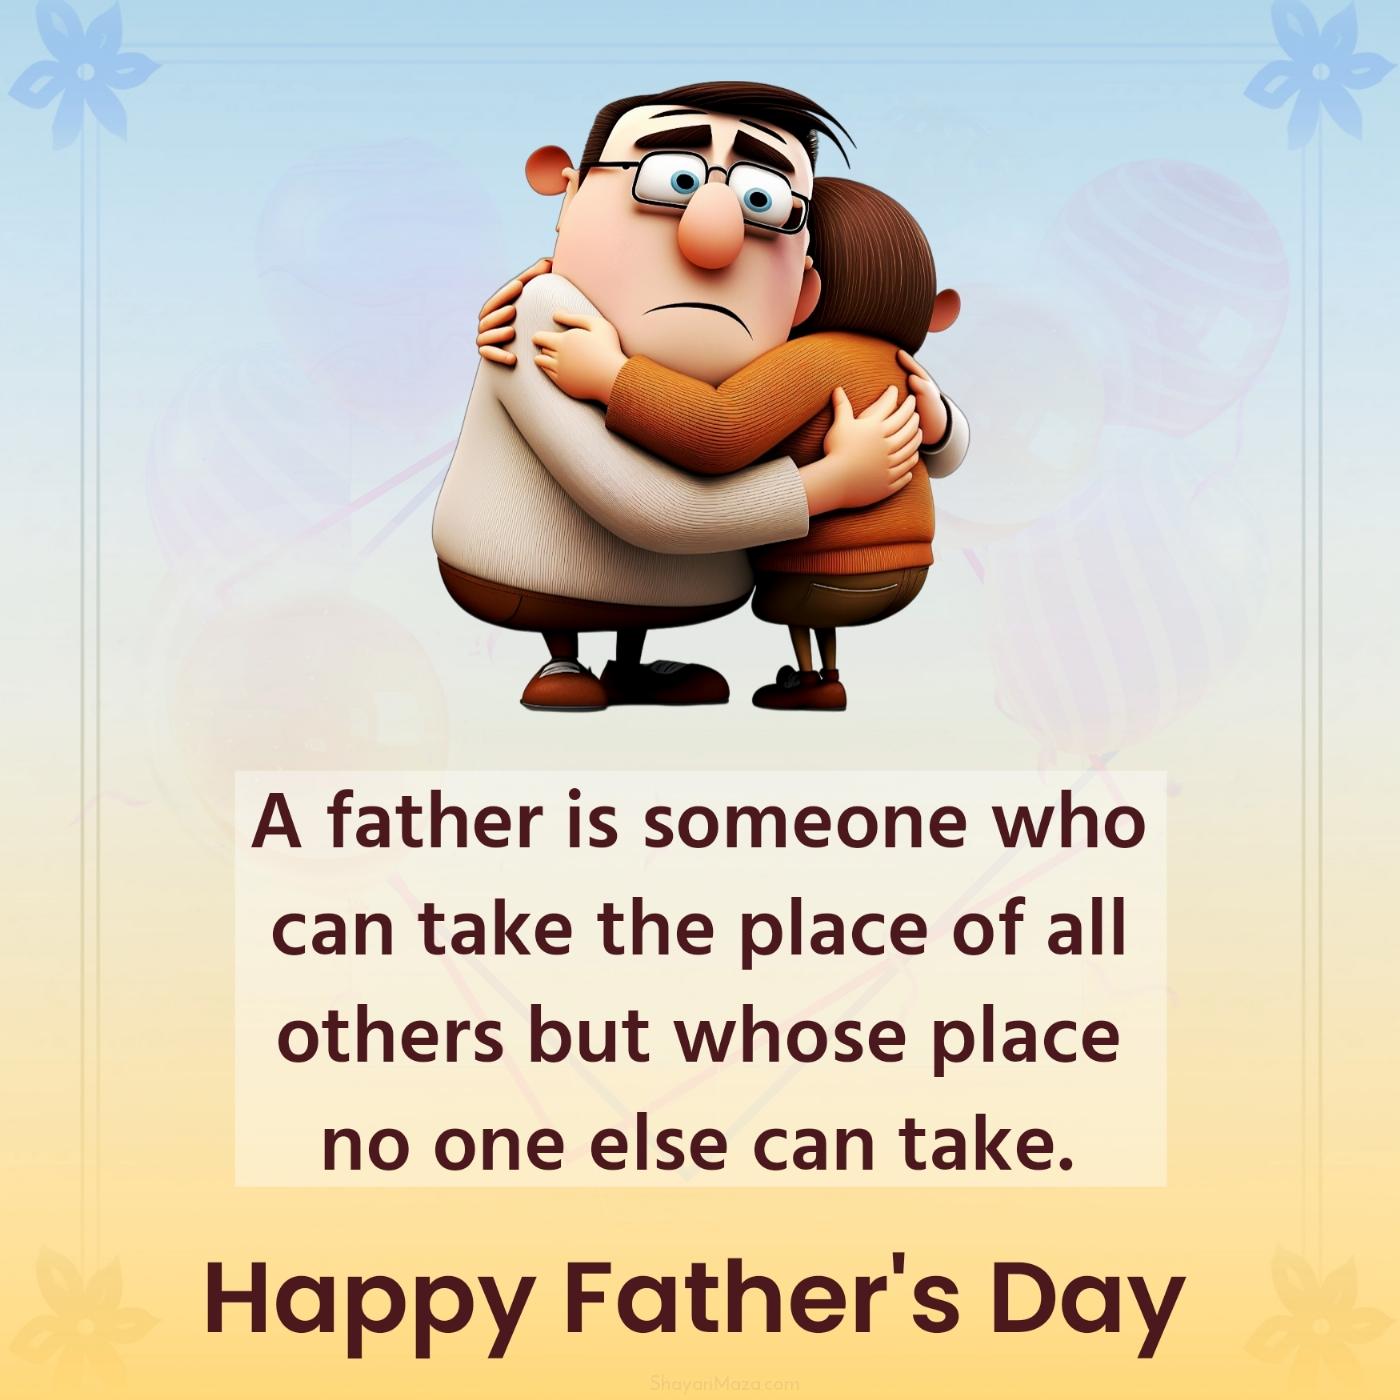 A father is someone who can take the place of all others